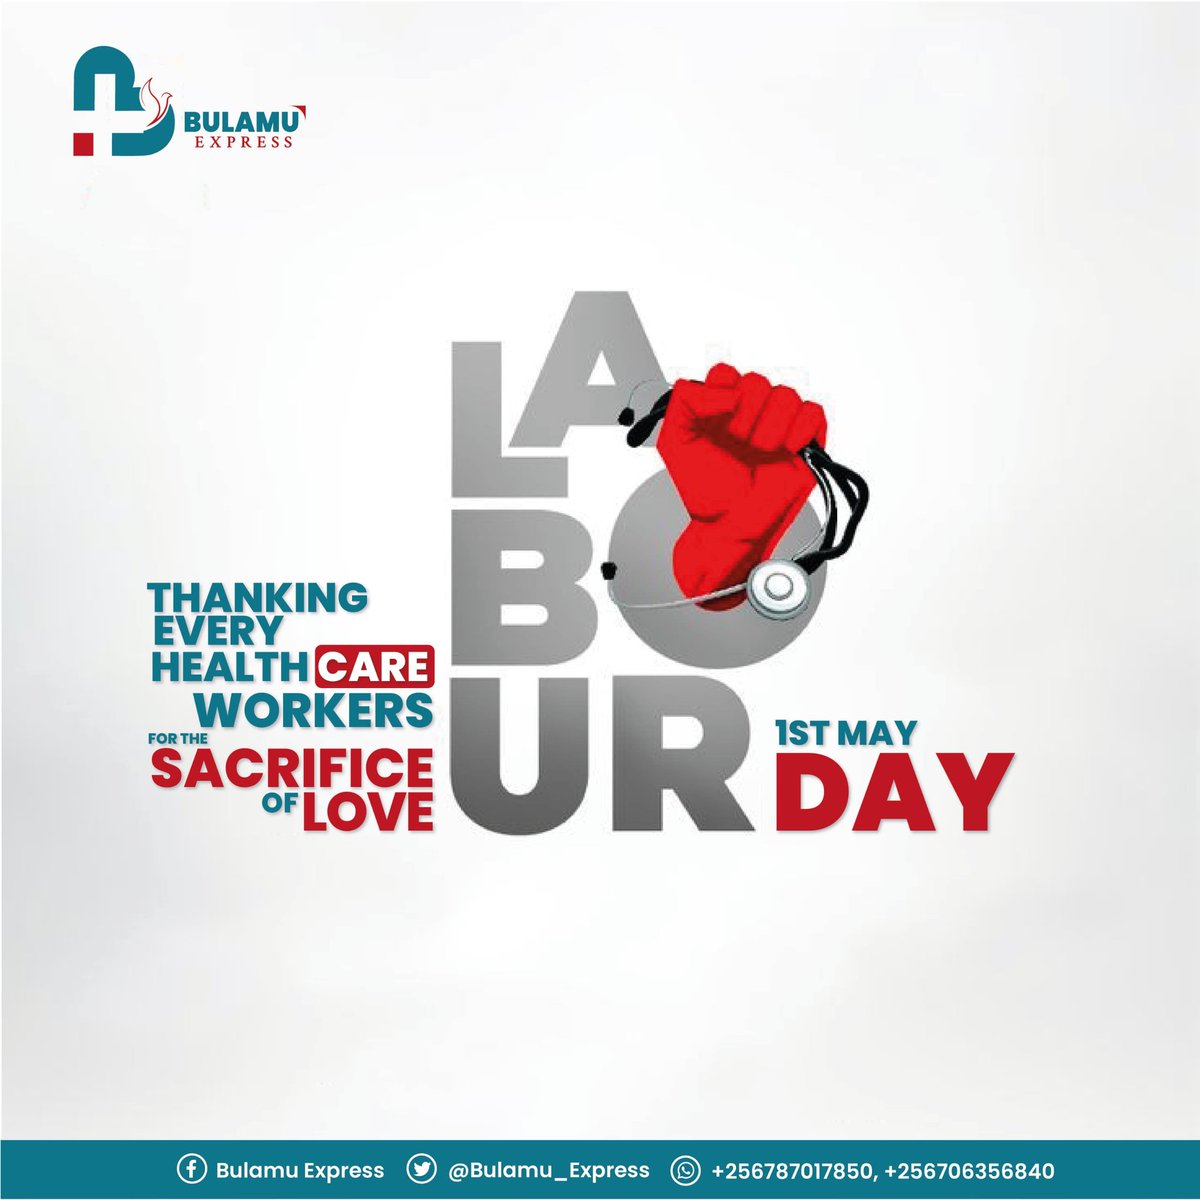 Today, we celebrate the hard work and dedication of healthcare professionals worldwide, who tirelessly strive to improve lives. Together, let's continue advancing e-health solutions for a healthier tomorrow. 

#LaborDay #eHealth #BulamuExpress